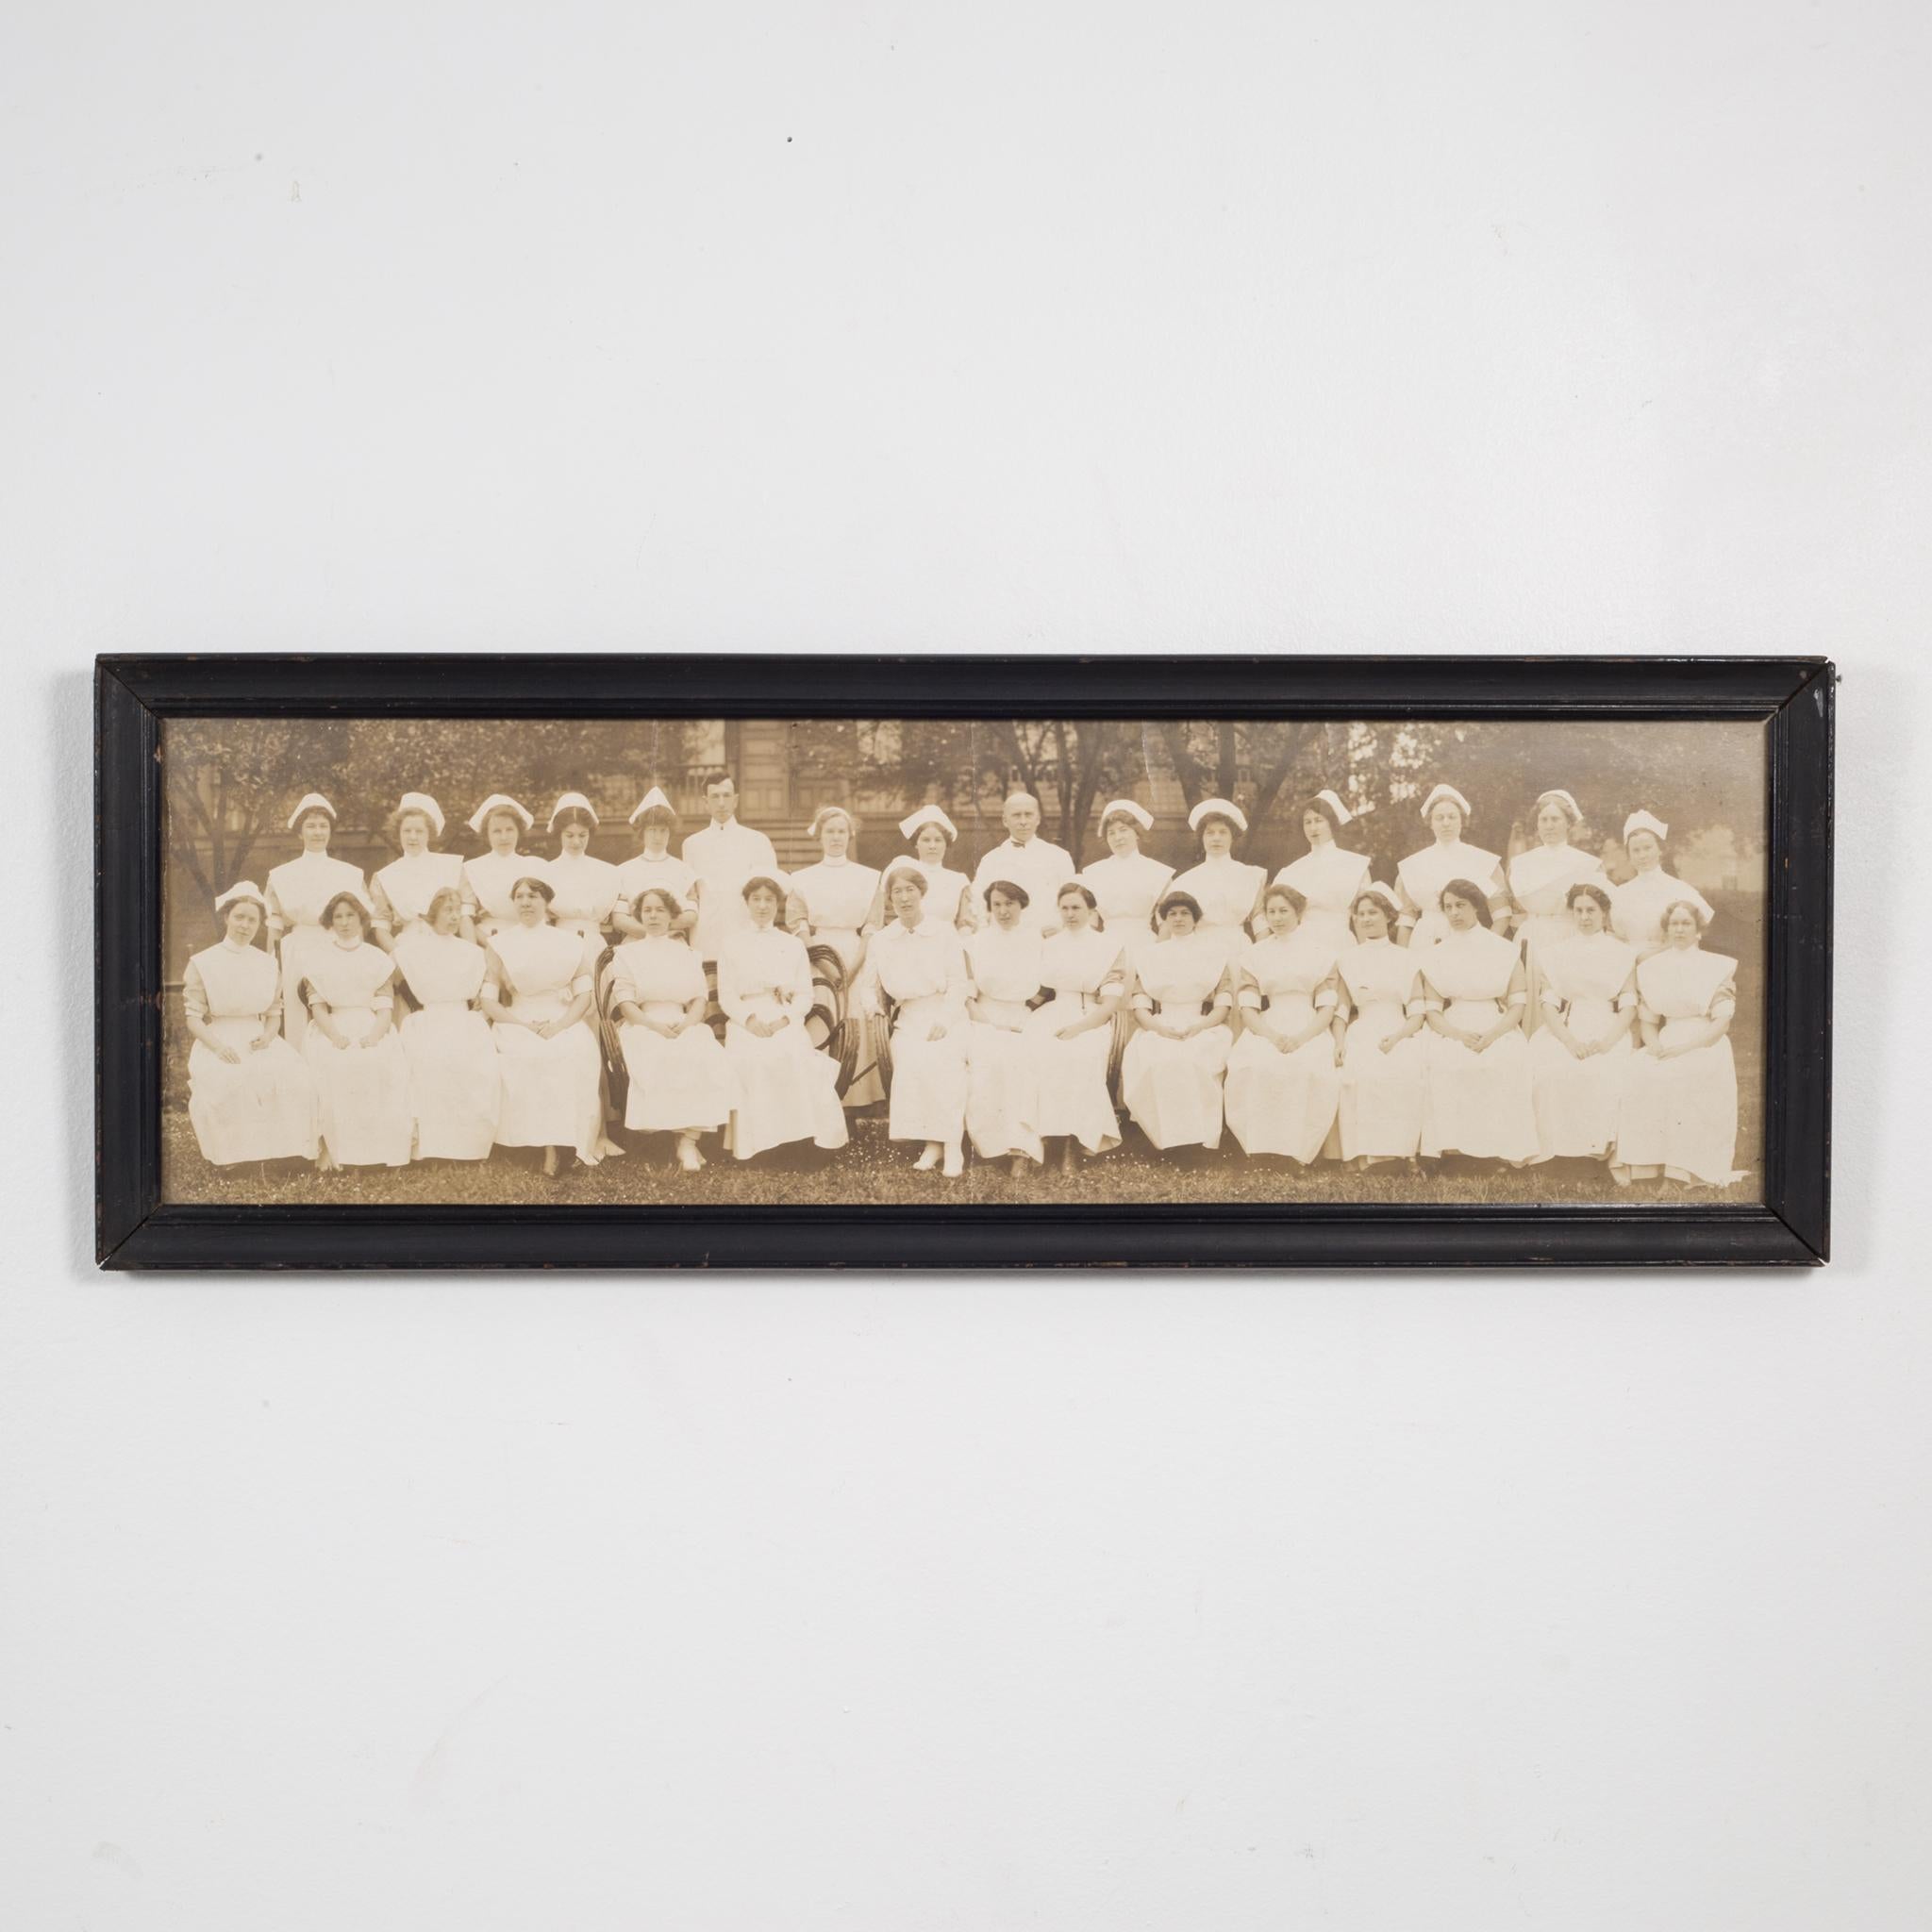 American Early 20th c. Nurses and Doctors Panoramic Photo c.1900-1910